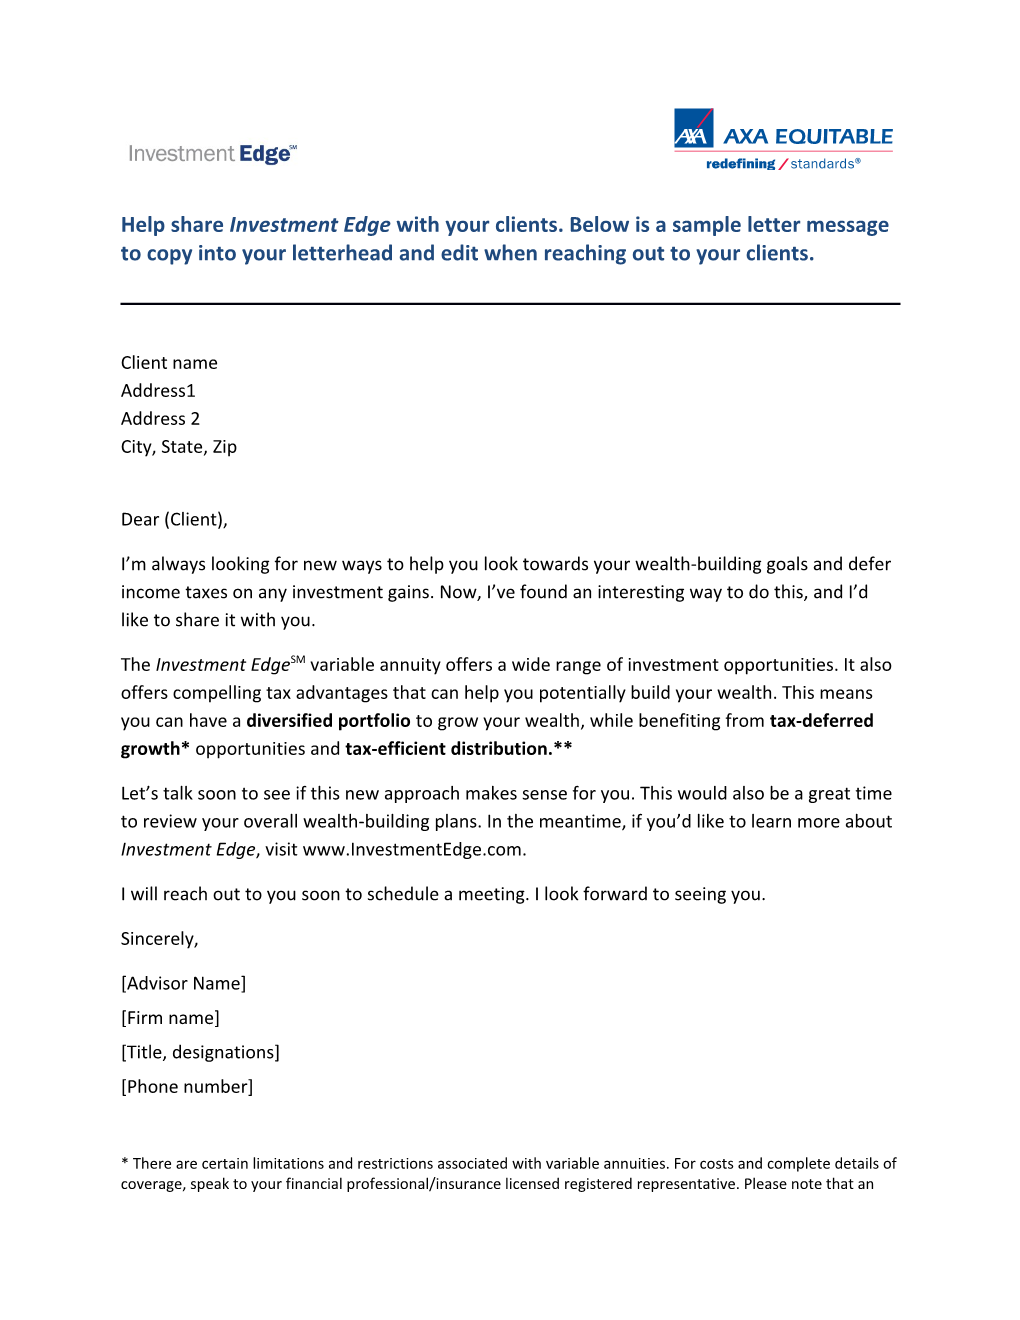 Help Share Investment Edge with Your Clients. Below Is a Sample Letter Message to Copy